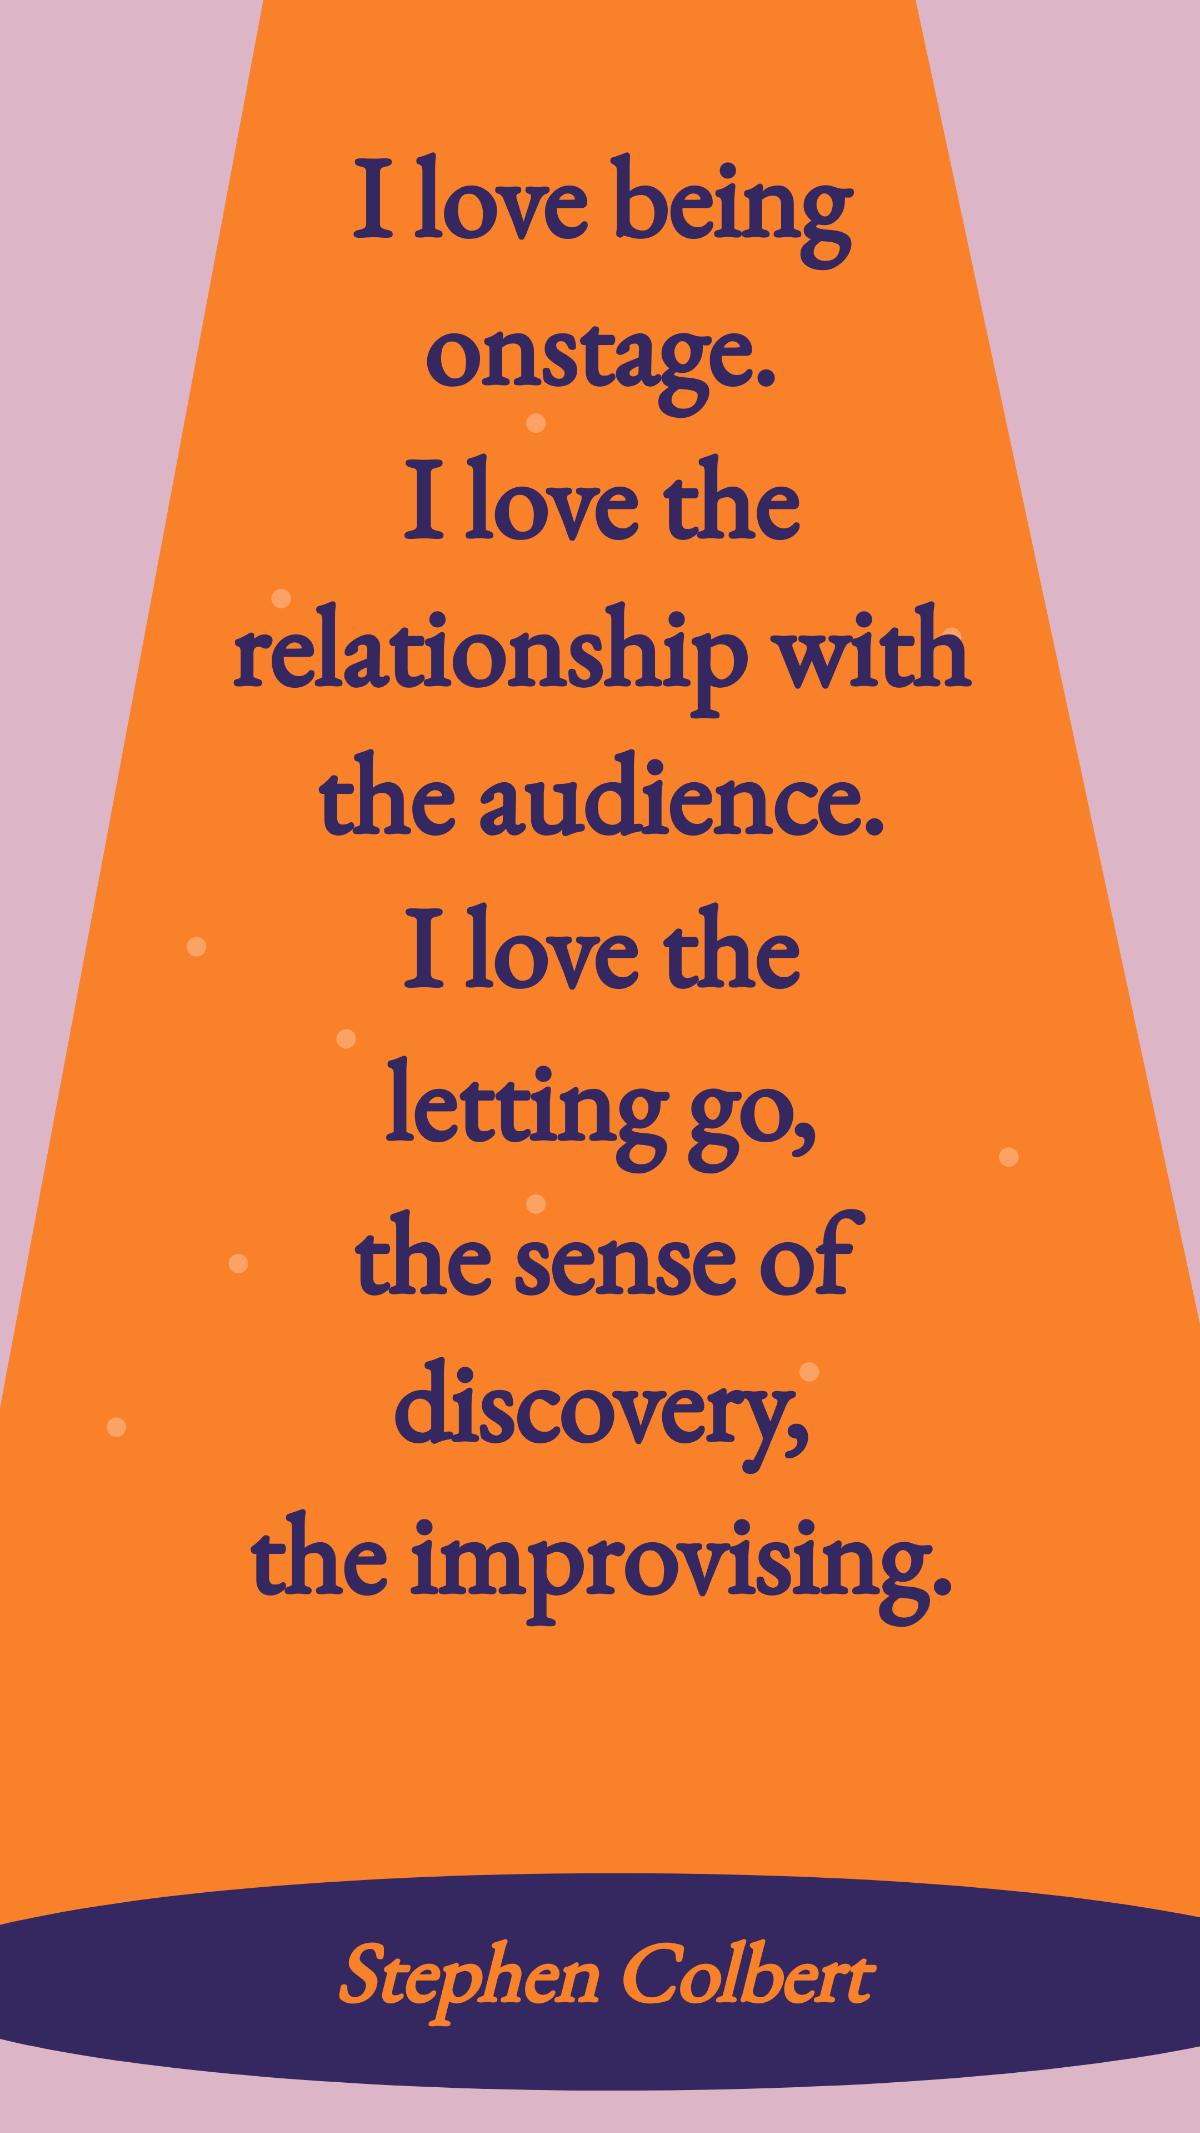 Stephen Colbert - I love being onstage. I love the relationship with the audience. I love the letting go, the sense of discovery, the improvising. Template